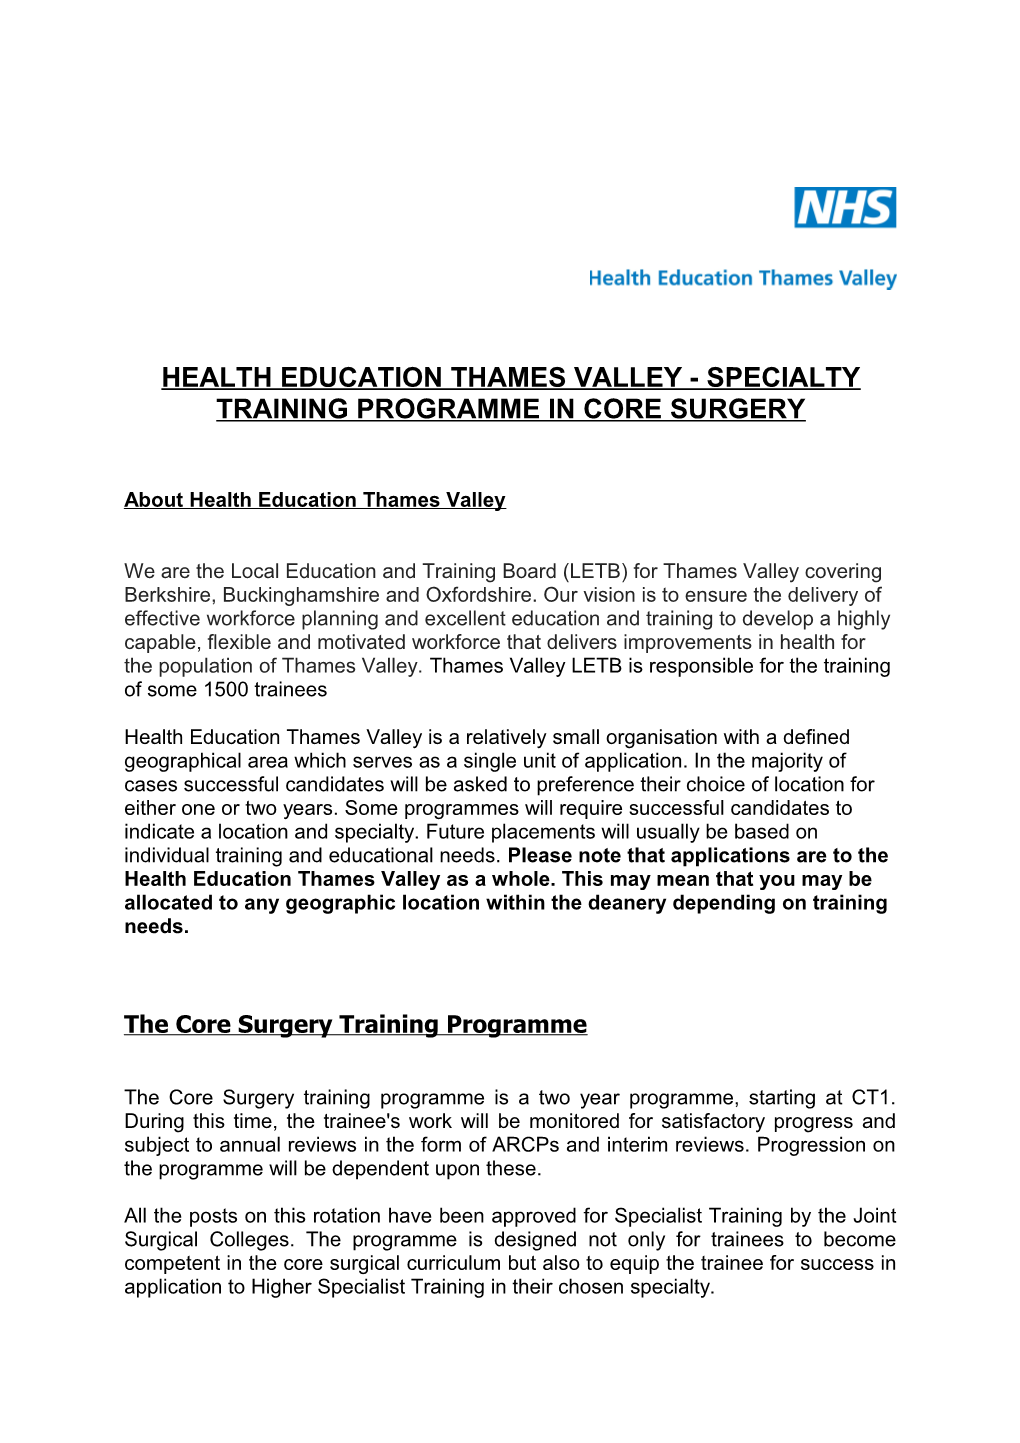 Health Education Thames Valley - Specialty Training Programme in Core Surgery